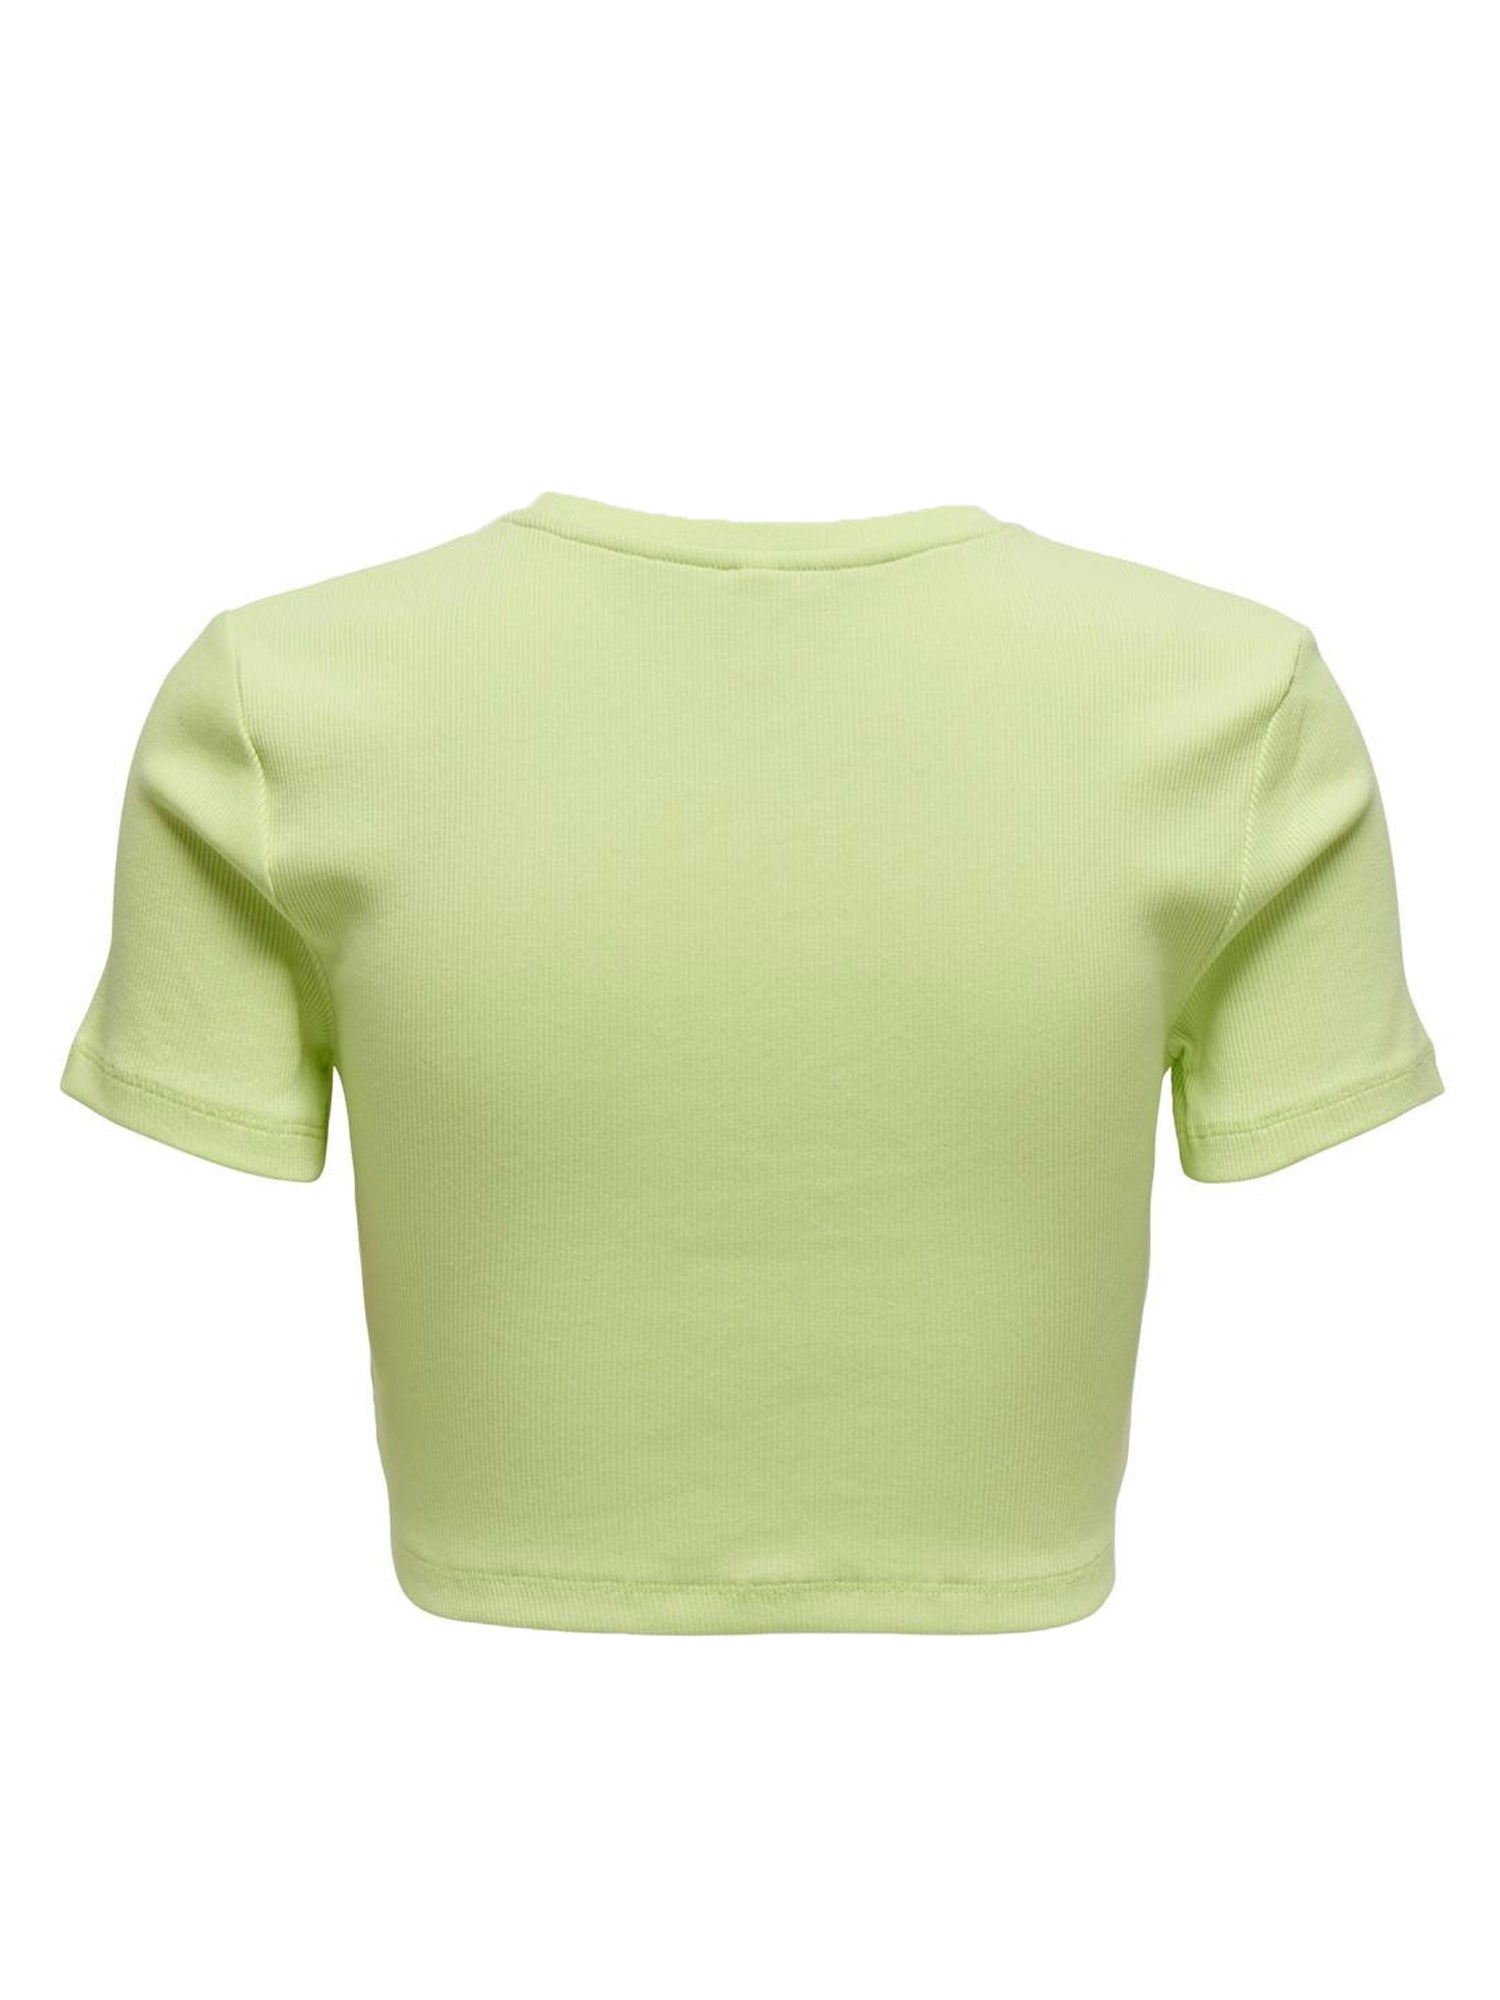 ONLY T-SHIRT FREJA CROPPED GIALLO LIME